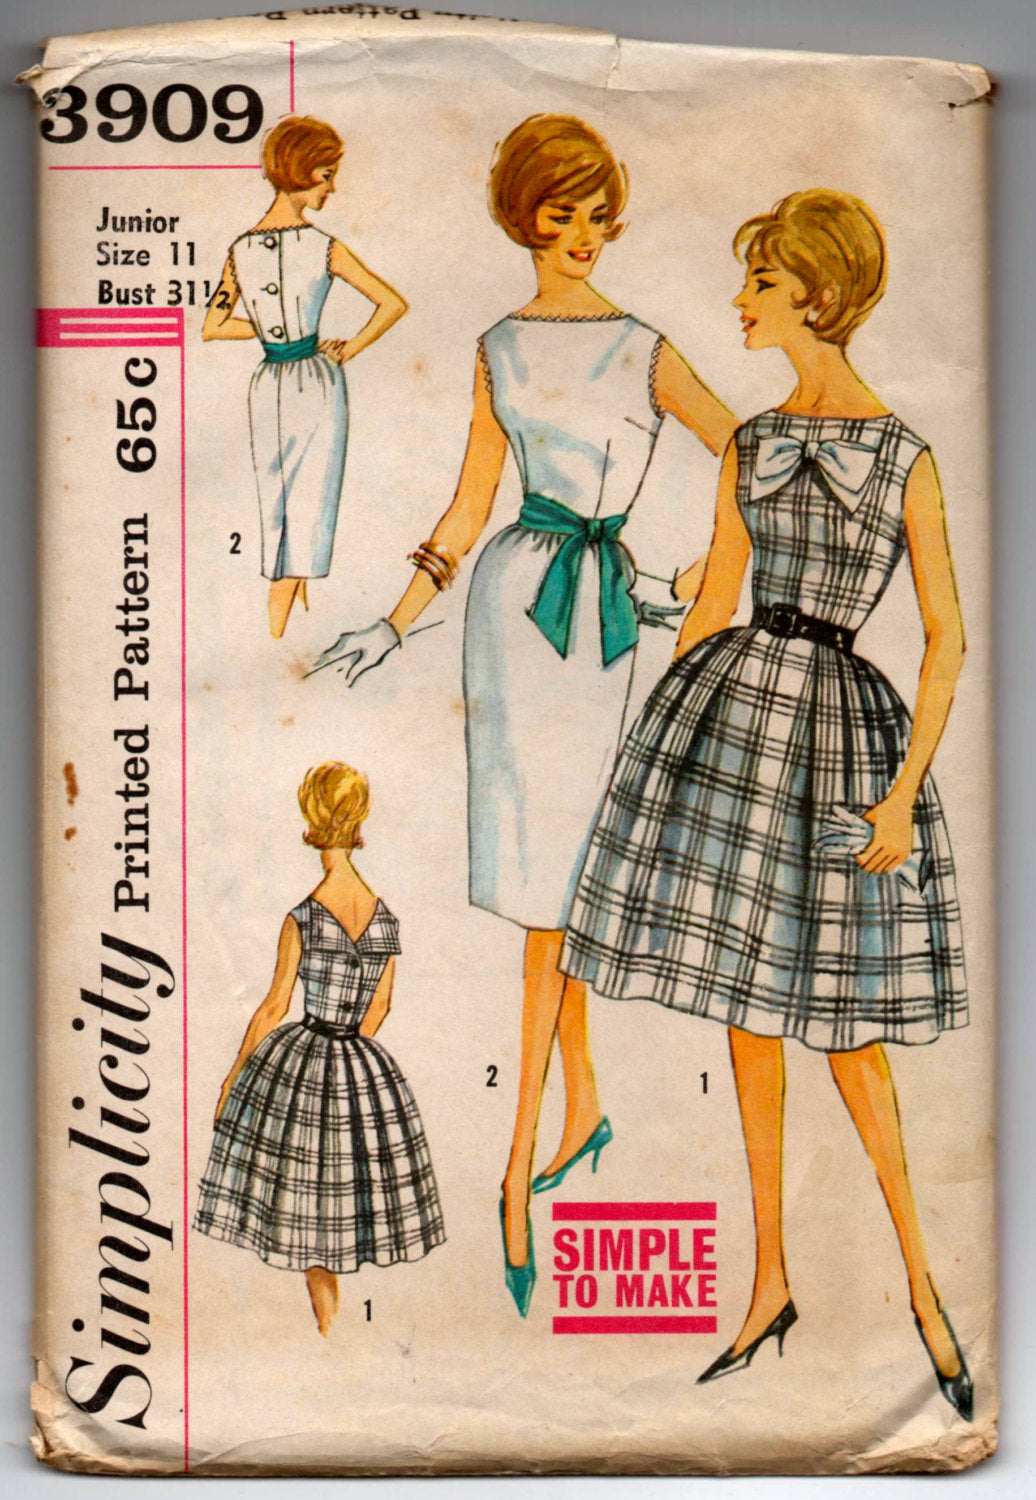 1960's Simplicity One-Piece Dress with Bow detail and button up back pattern - Bust 31.5